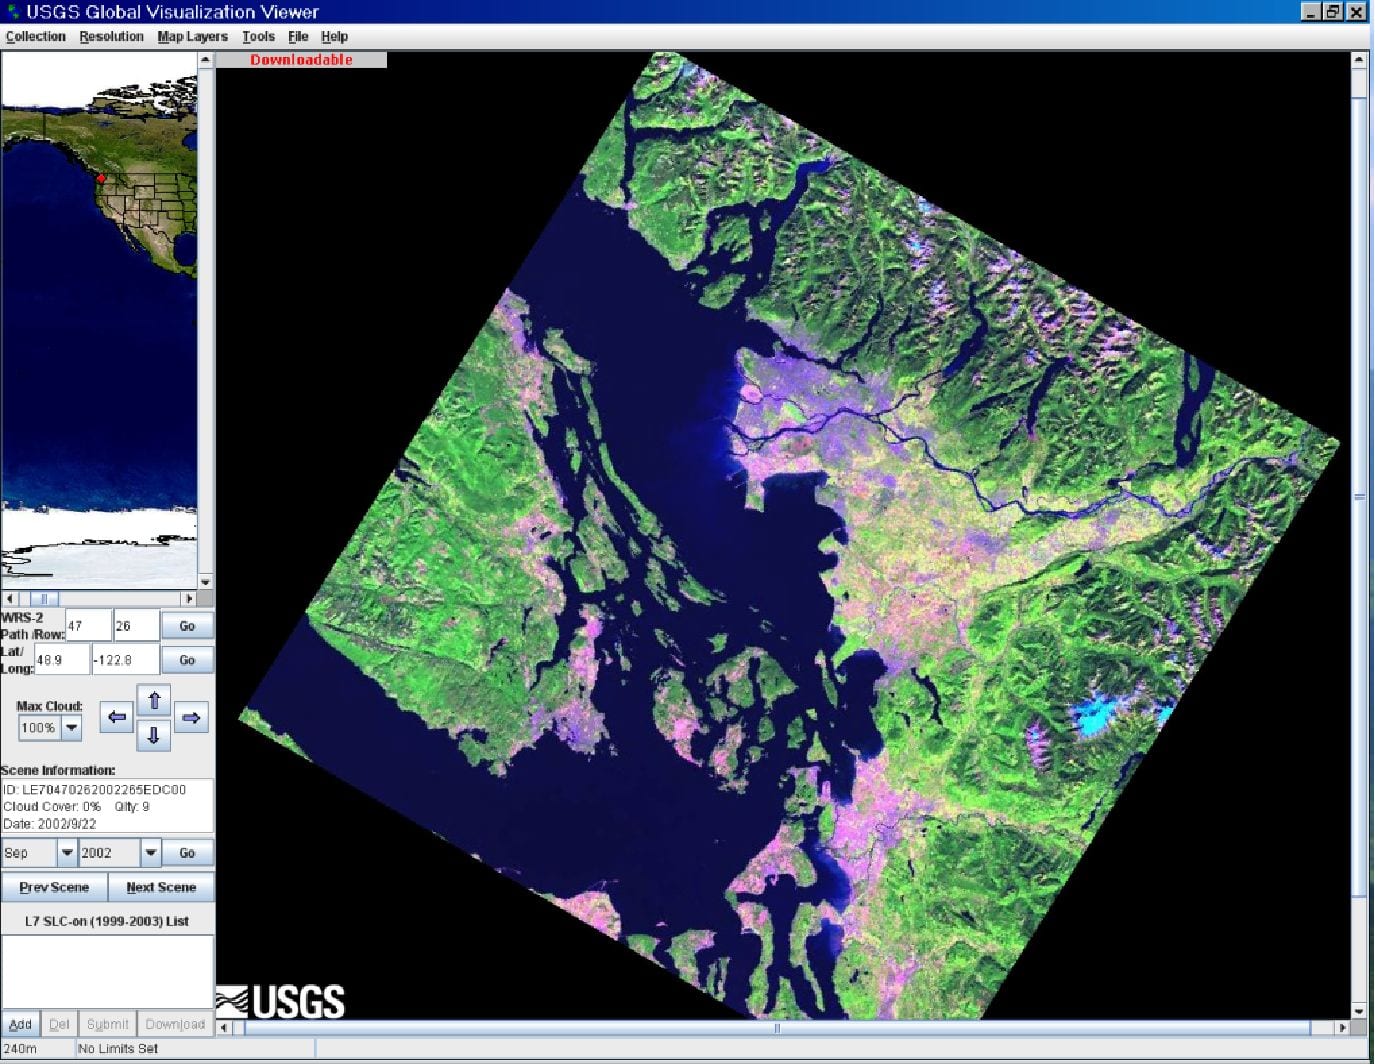 Figure 1. Example browse image that includes the Vancouver, Canada region, acquired by Landsat-7, 22 September, 2002.